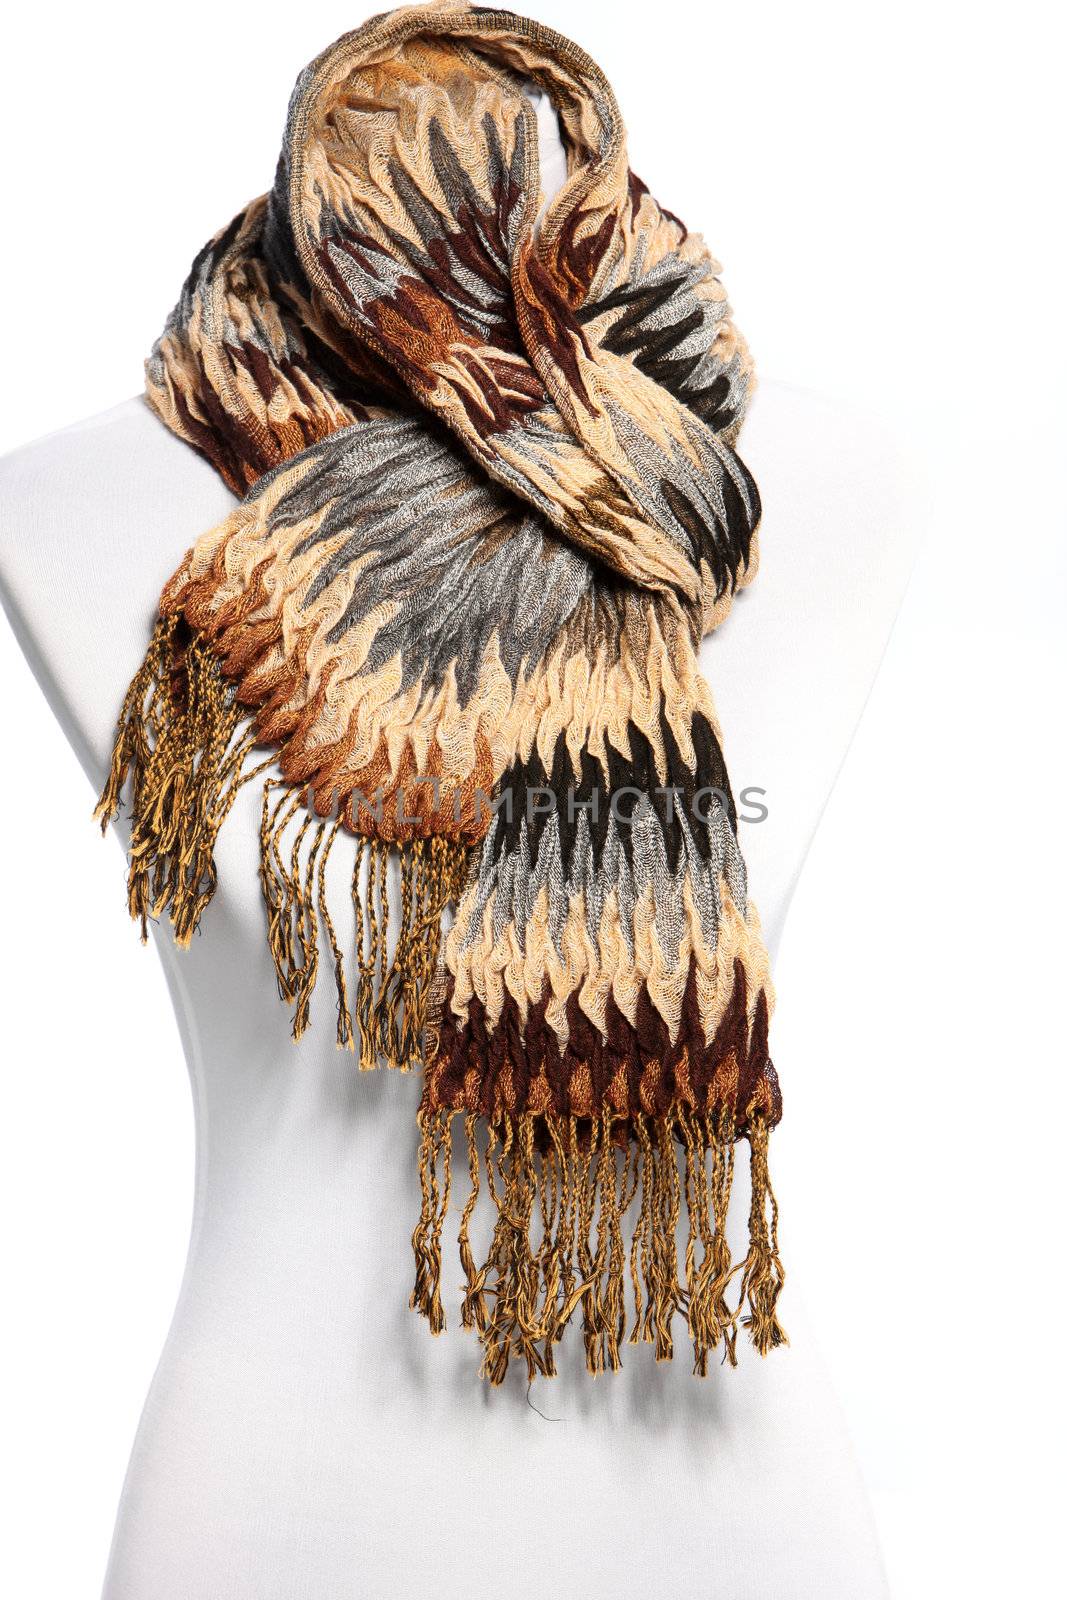 Mannequin in a soft cuddly warm winter scarf with a zig-zag striped pattern in browns and greys and long luxurious tassels